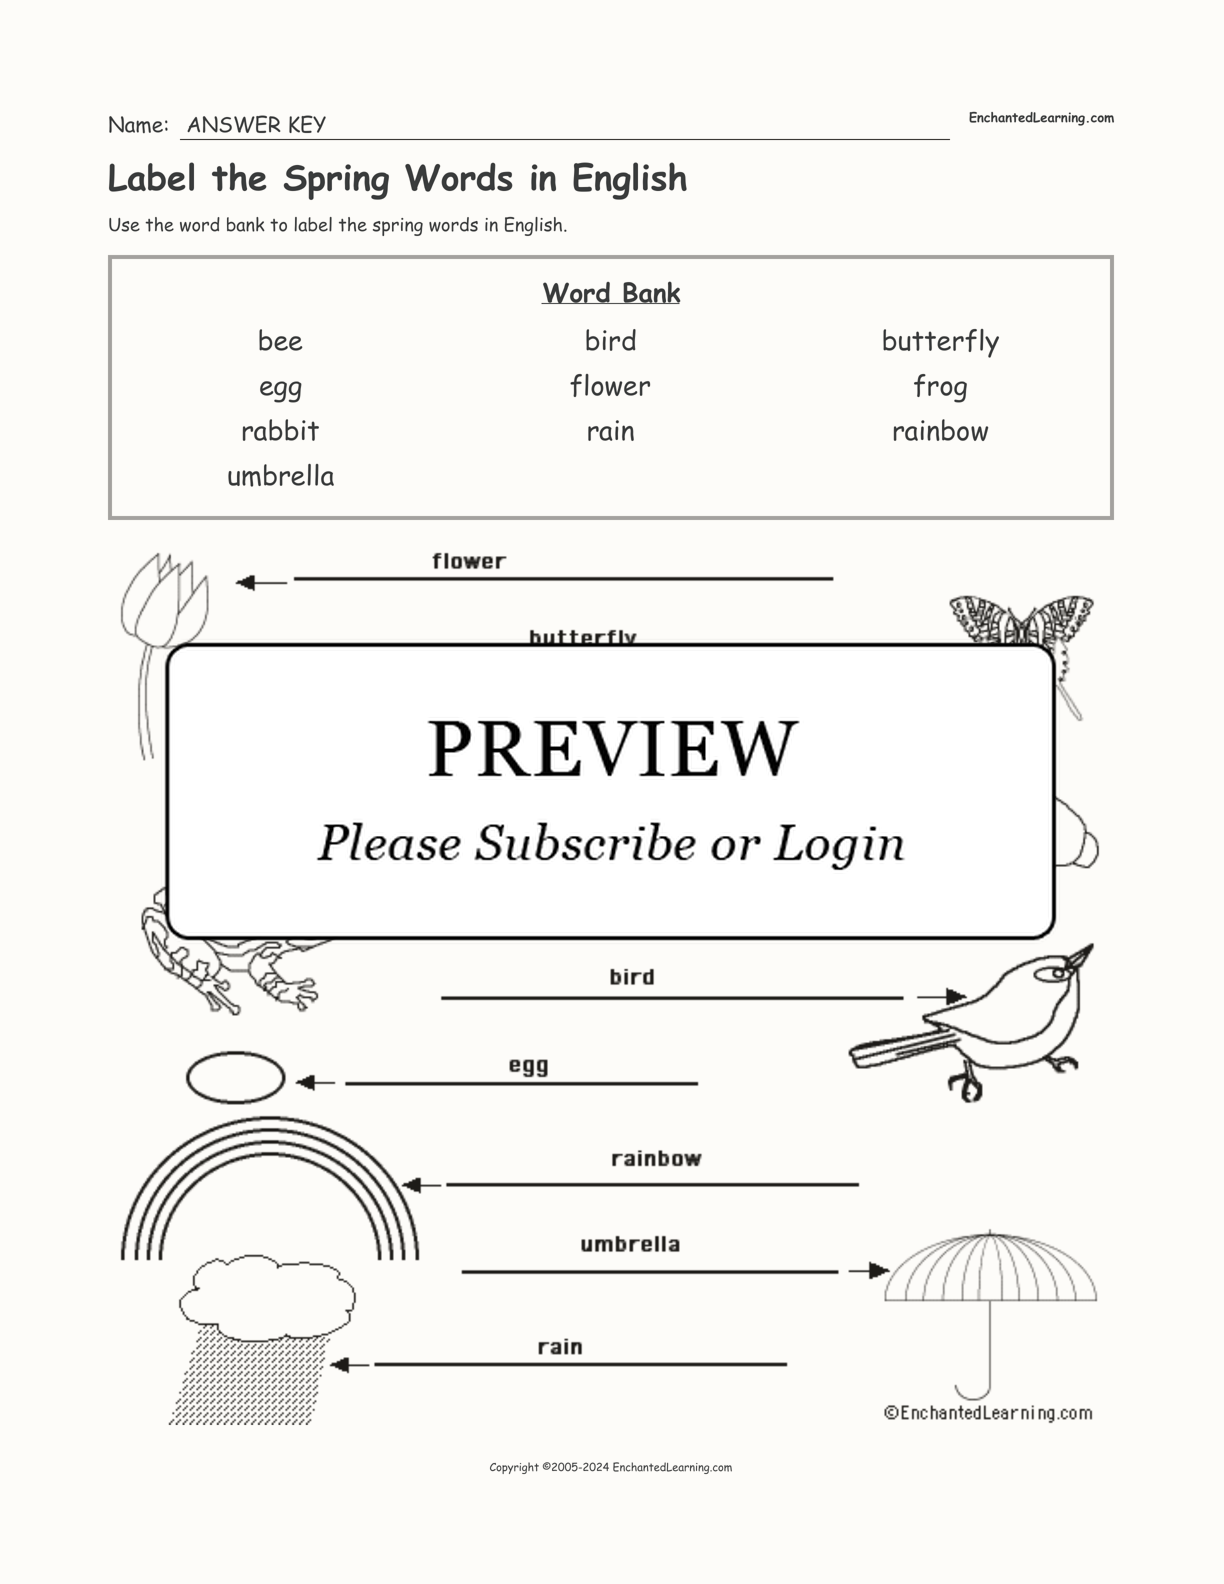 Label the Spring Words in English interactive worksheet page 2